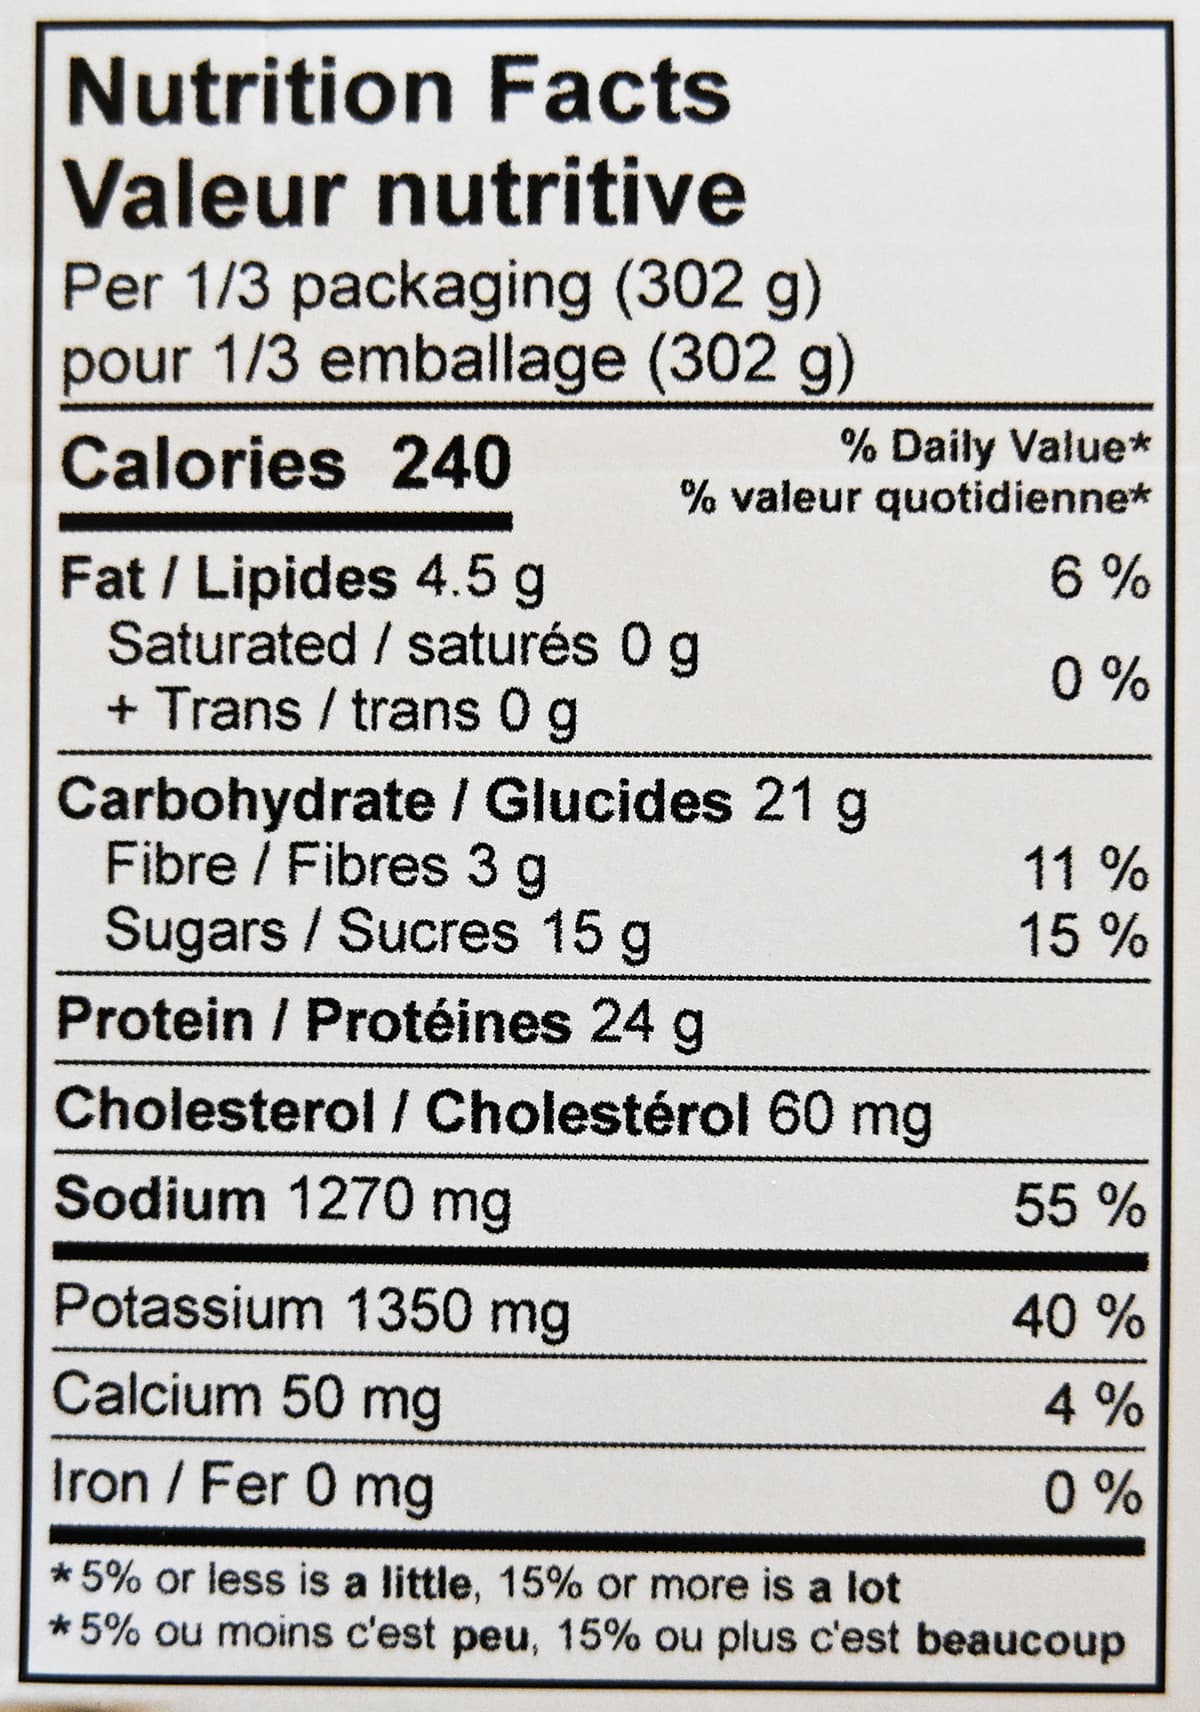 Image of the nutrition facts label from the box.